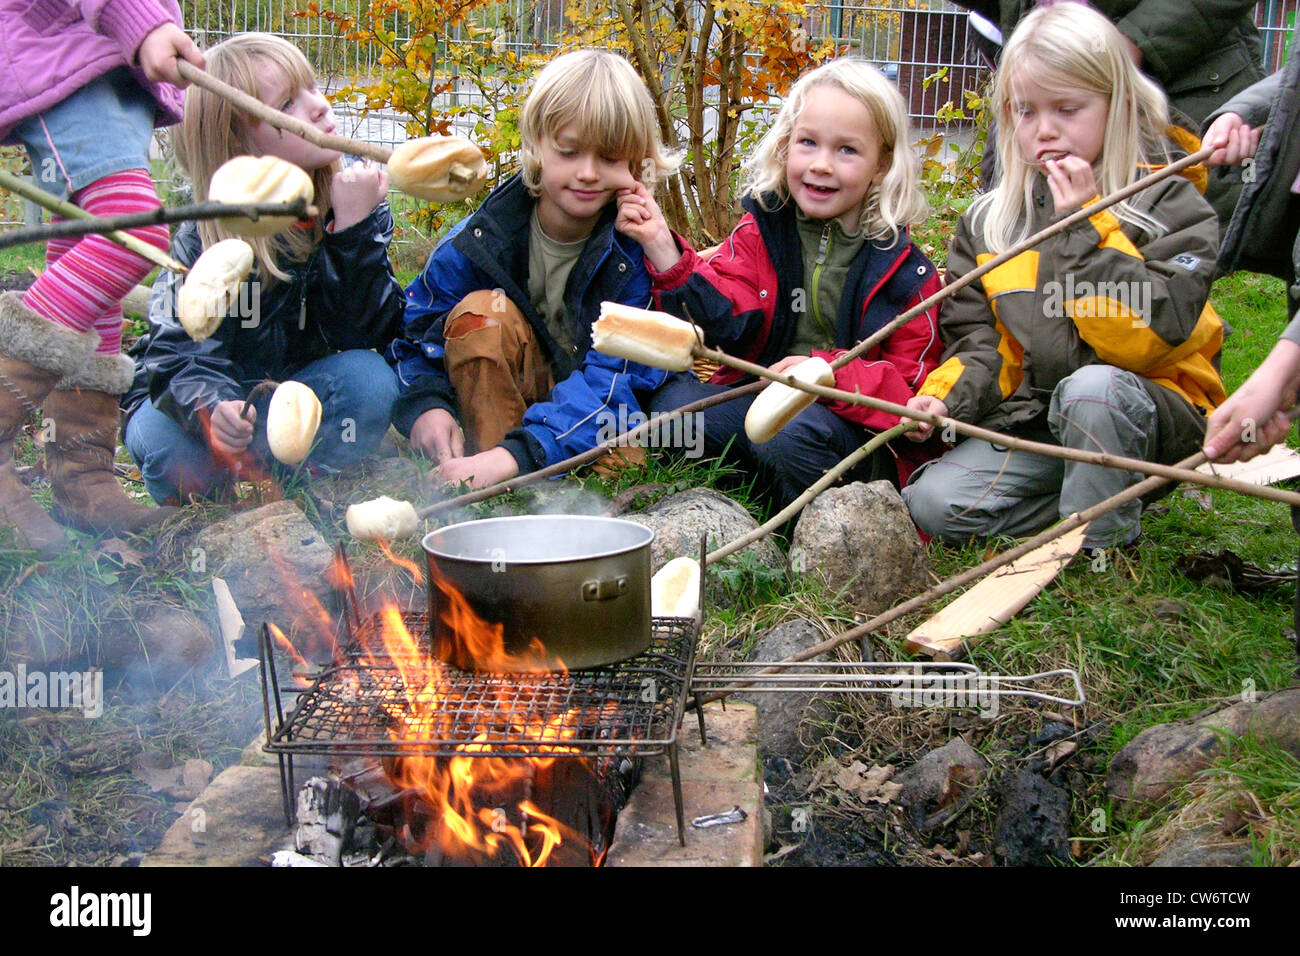 primary school children at a campfire roasting bread rolls on sticks and cooking water for tea, Germany Stock Photo